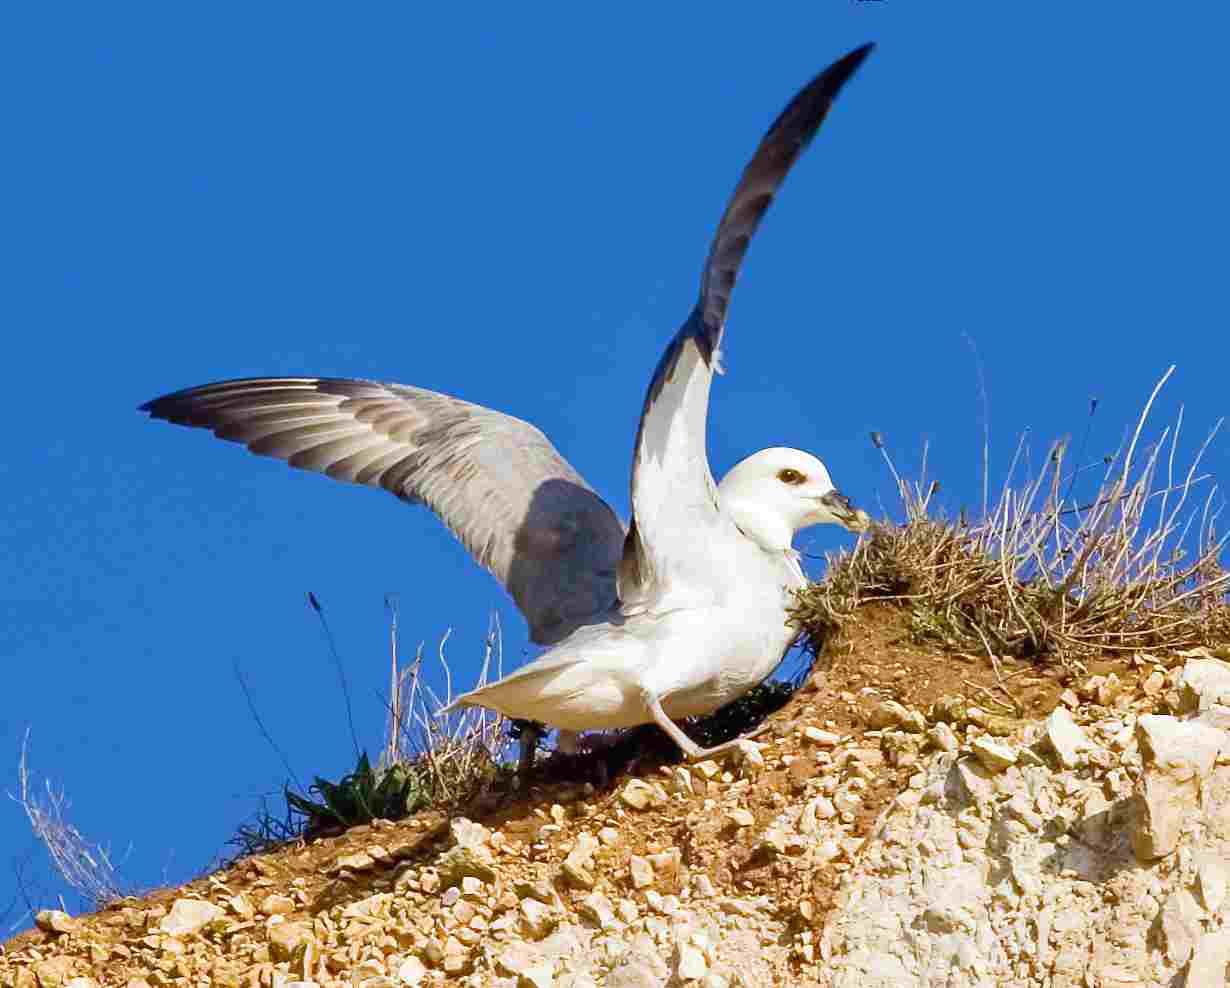 Decomposers in The Tundra: The Northern Fulmar is a Known Tundra Scavenger (Credit: Archaeodontosaurus 2018 .CC BY-SA 2.0.)